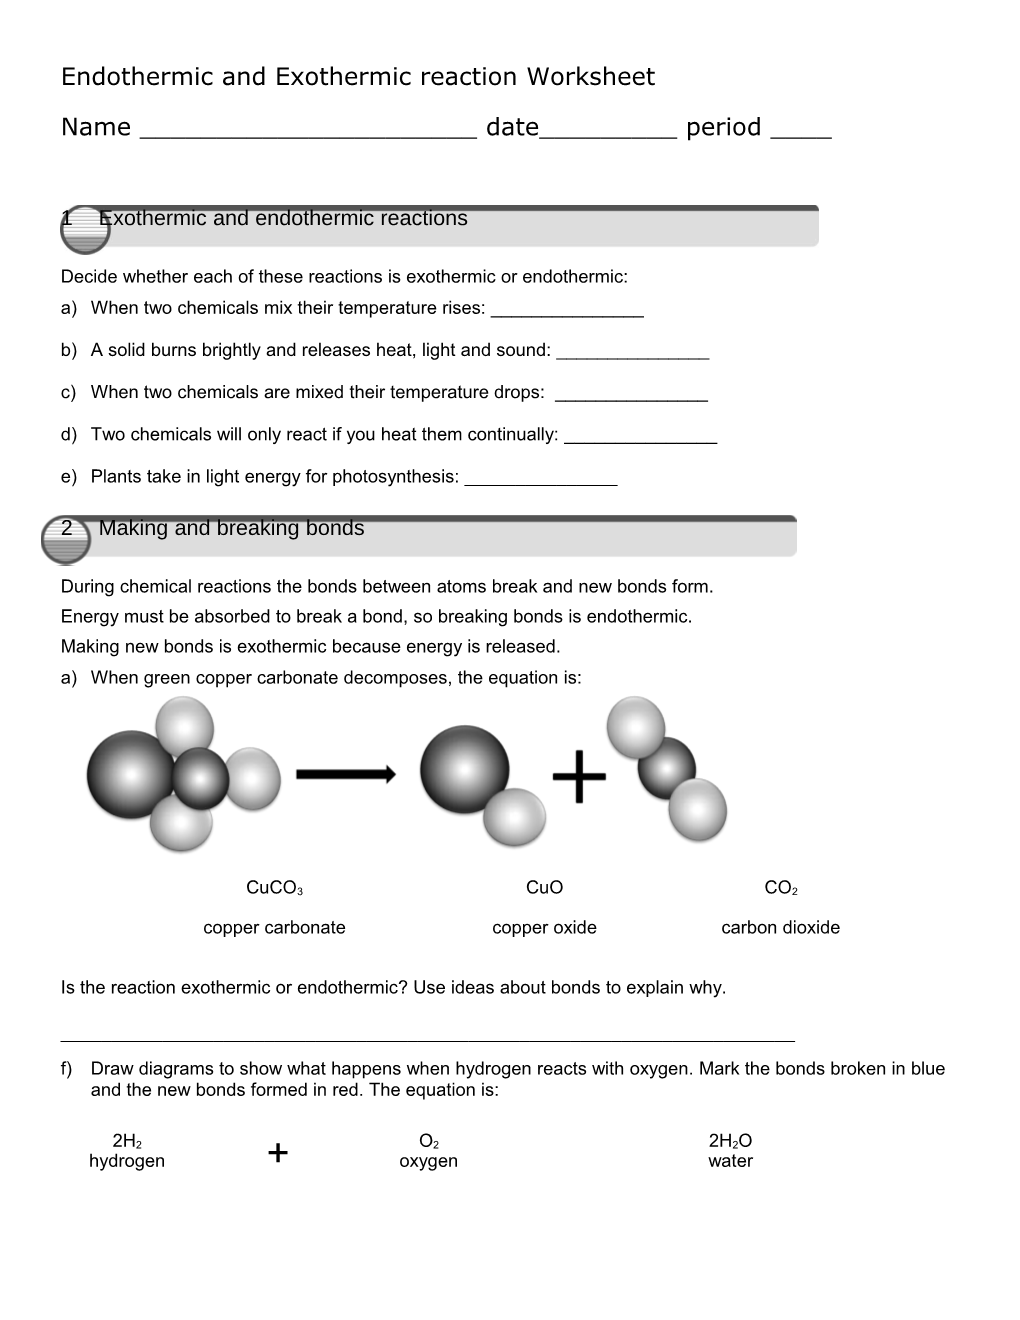 Endothermic and Exothermic Reaction Worksheet